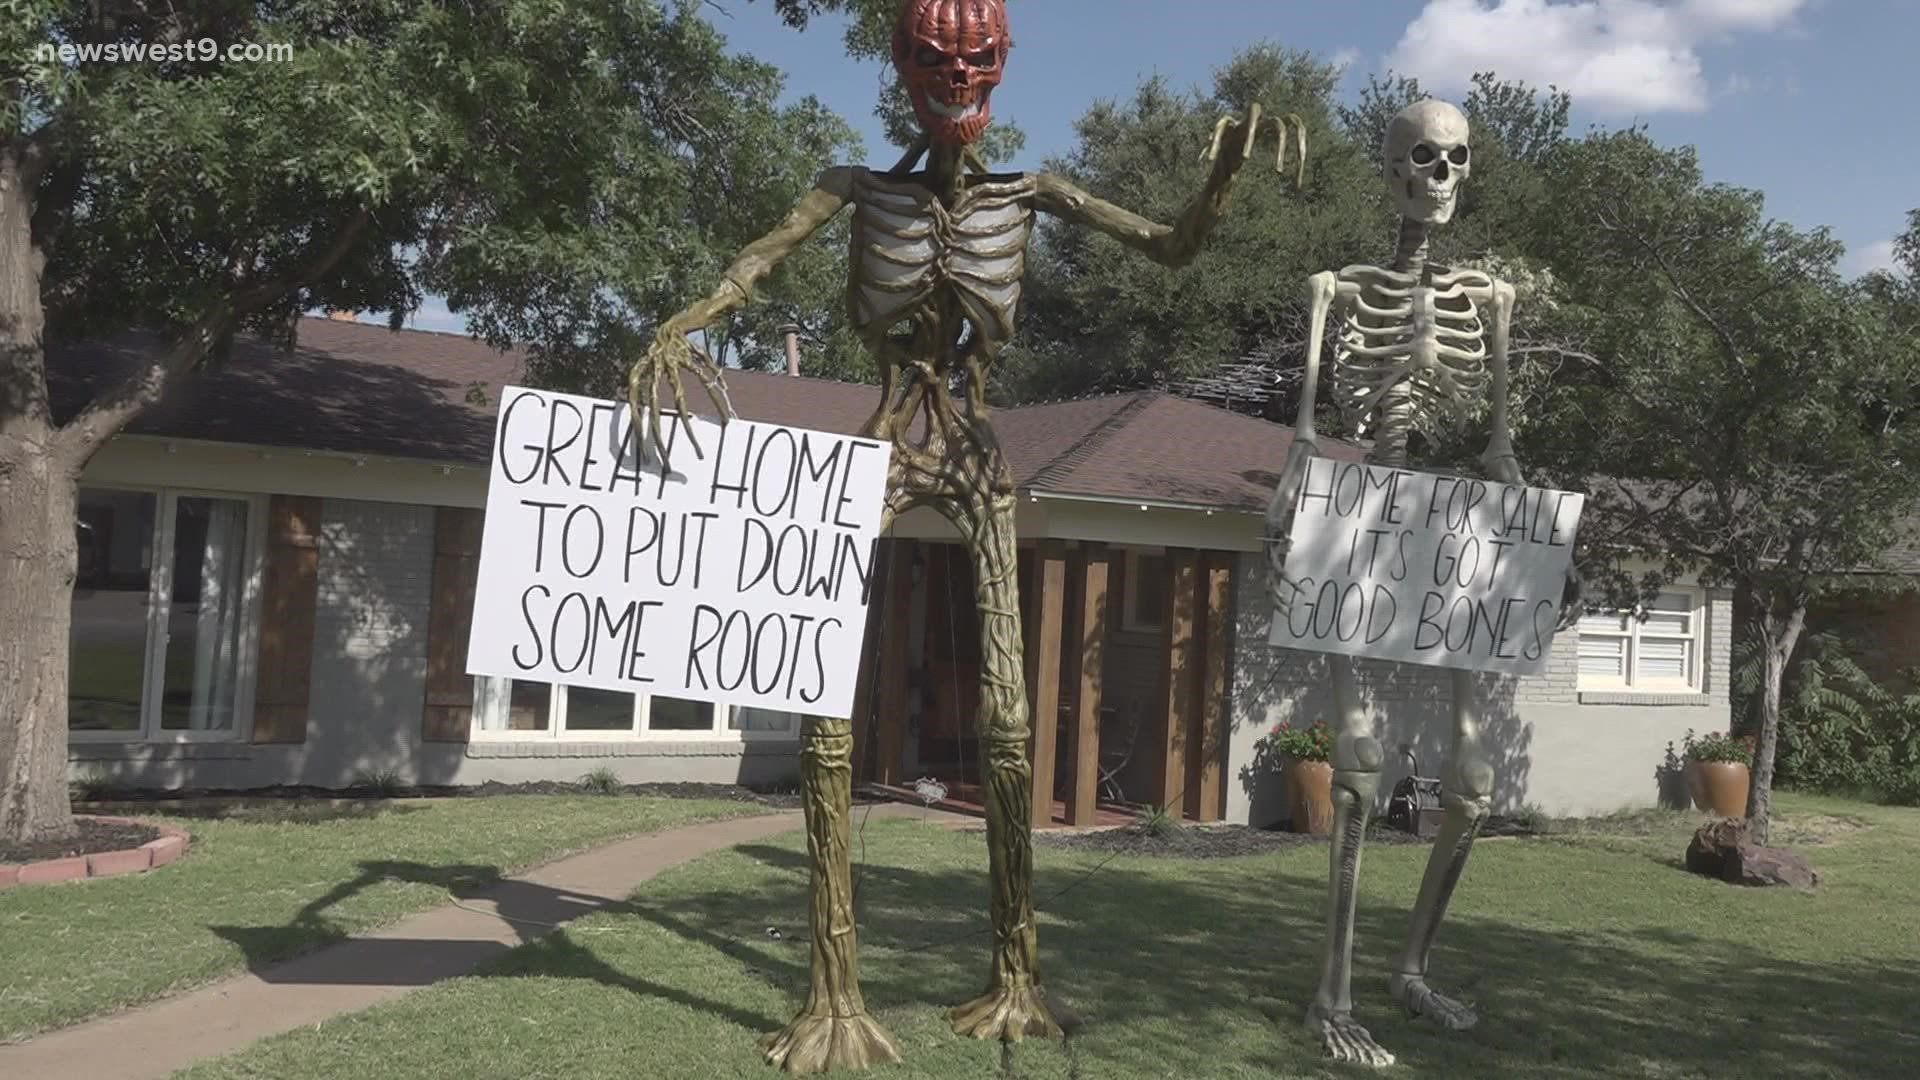 After having some trouble selling their home, the Moreno family put up two, 12-foot skeletons that're holding advertisement signs to try and find potential buyers.